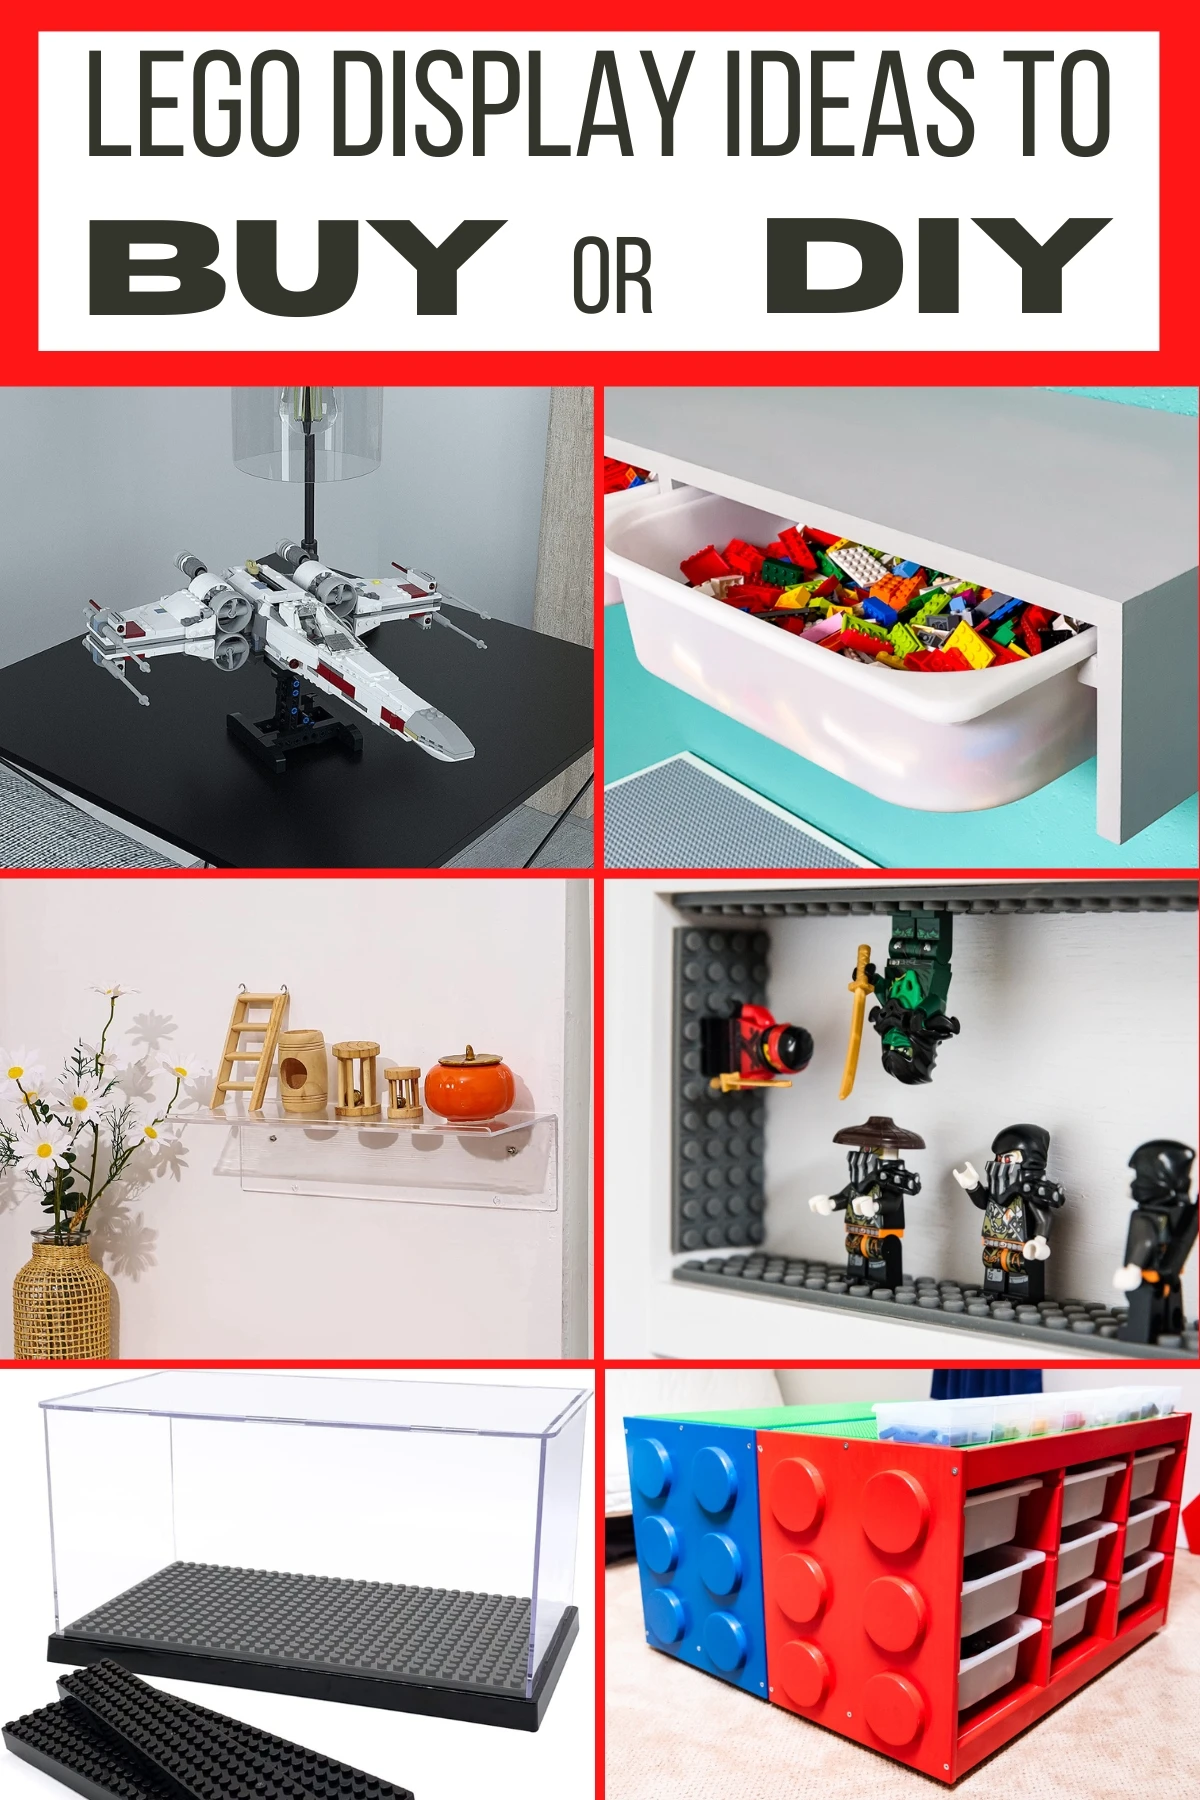 What's the best modern way to permanently glue Lego together? (I